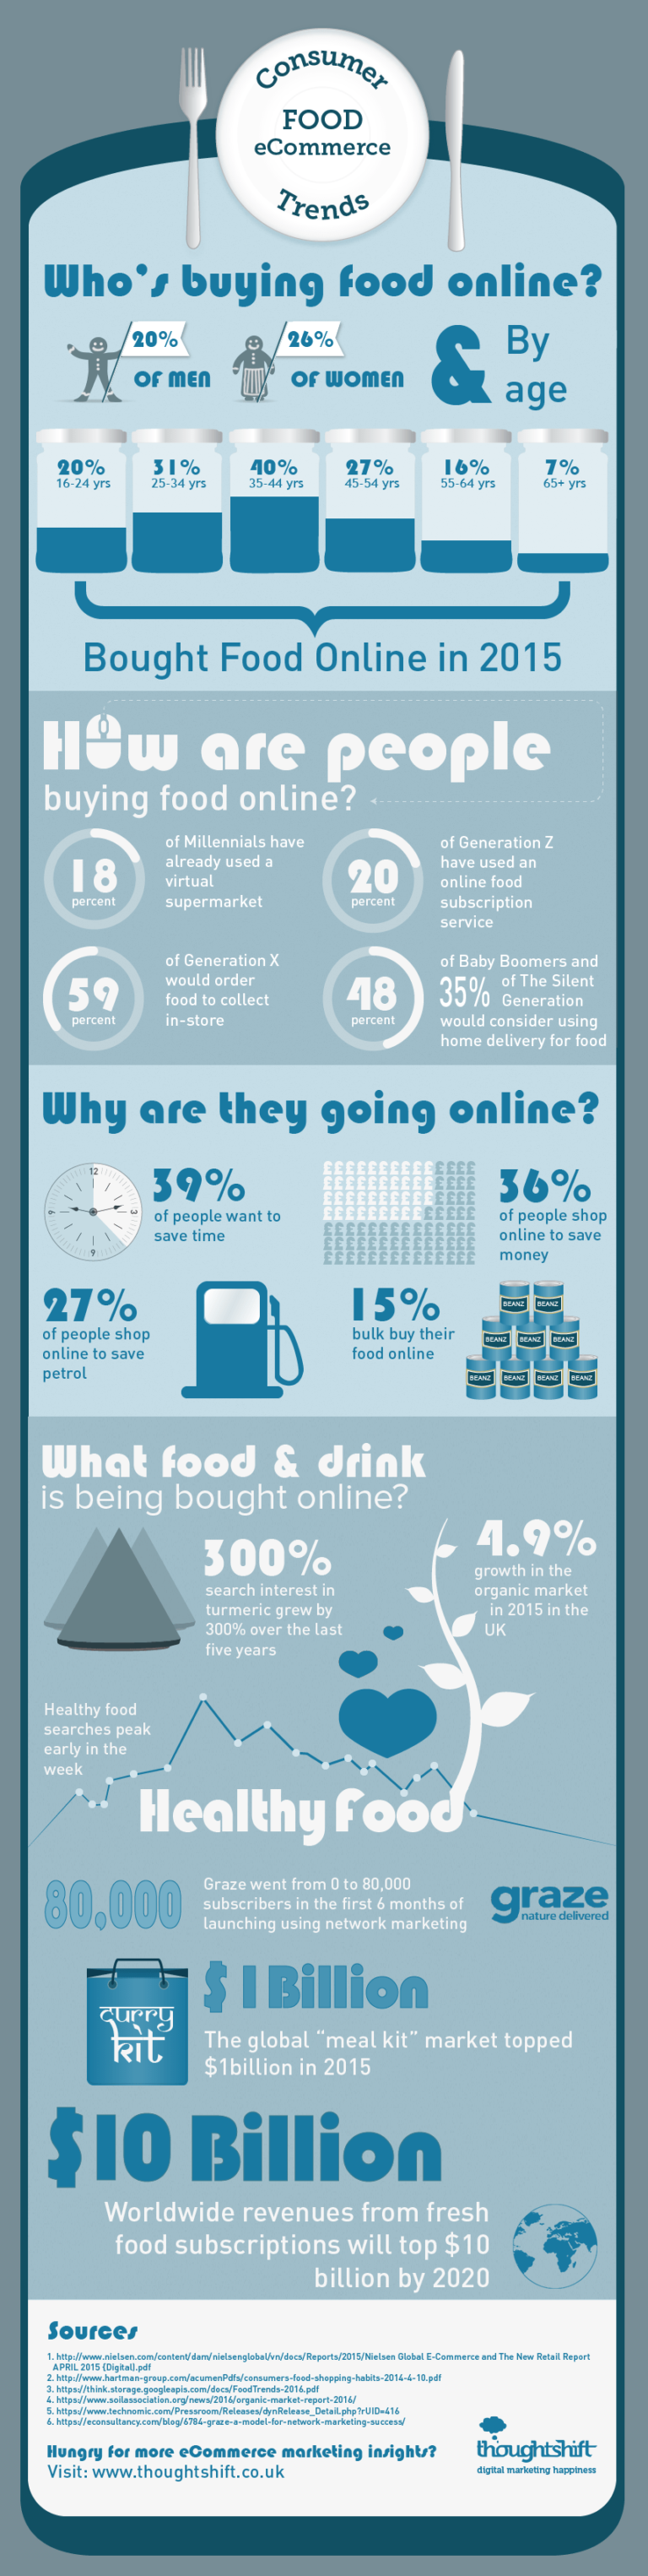 ThoughtShift Presents the Consumer Food eCommerce Trends Infographic